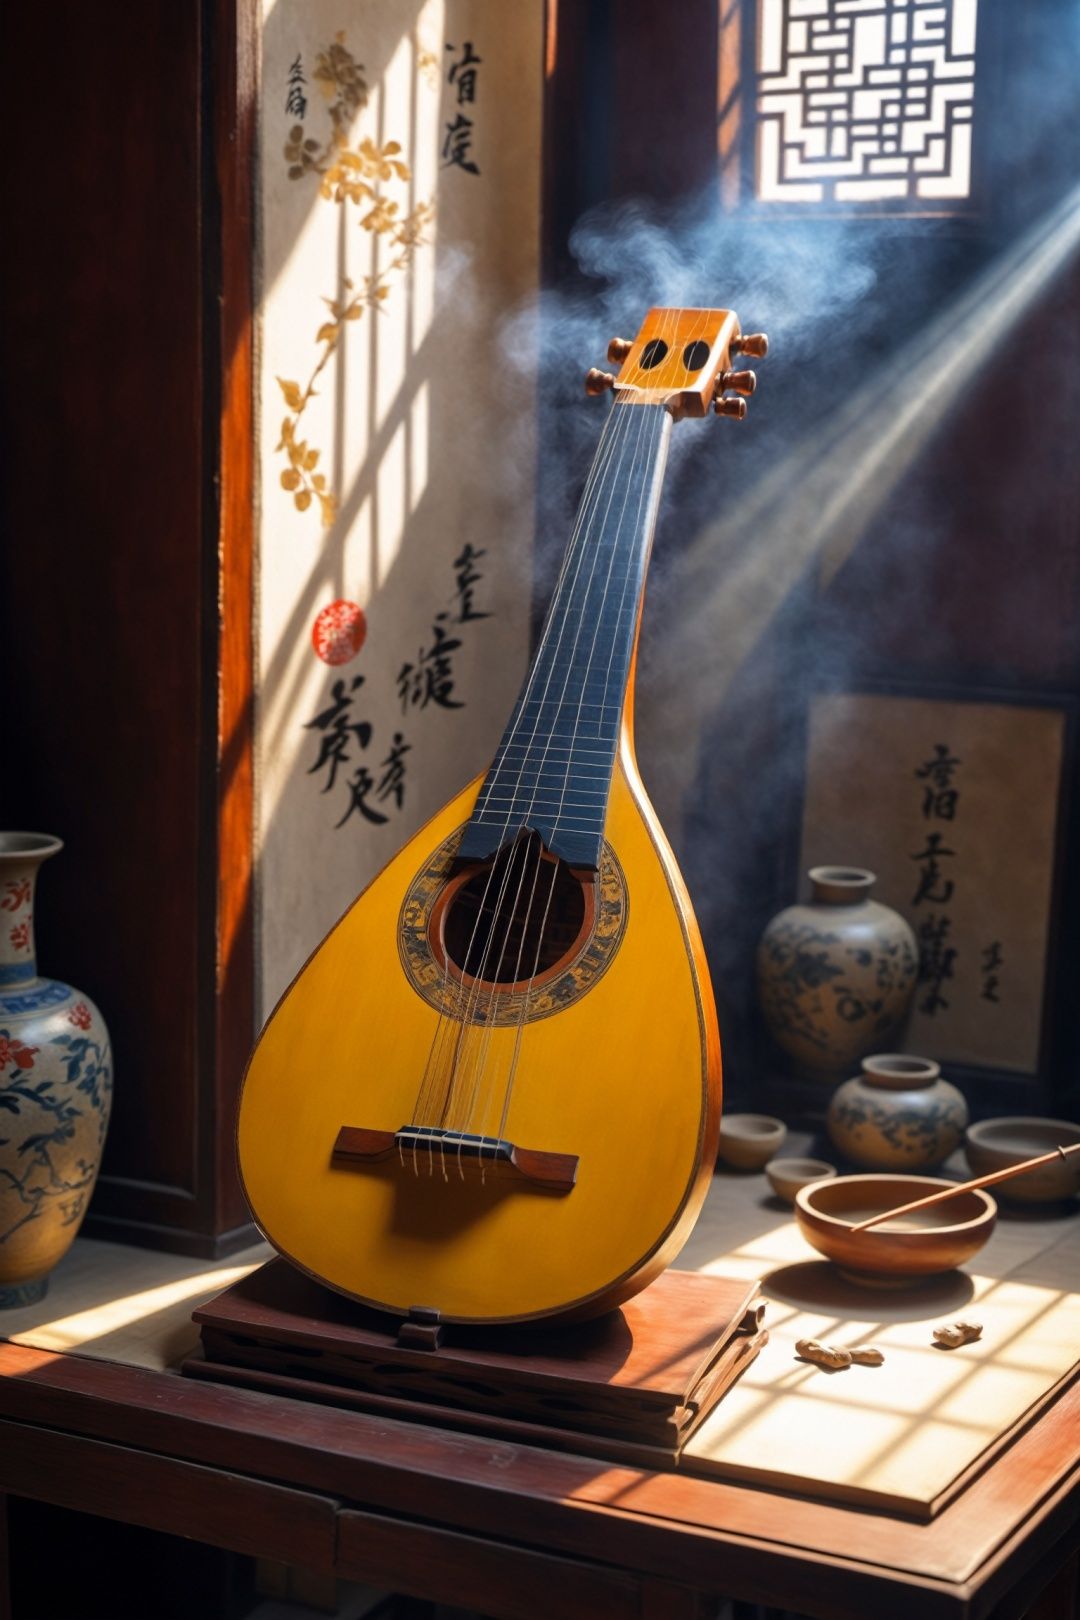  A lute with broken strings, Chinese style, Put it in a corner full of clutter, The sun shines through the dust onto the lute, There was smoke, Decadent, Dilapidated, Traditional Chinese painting style